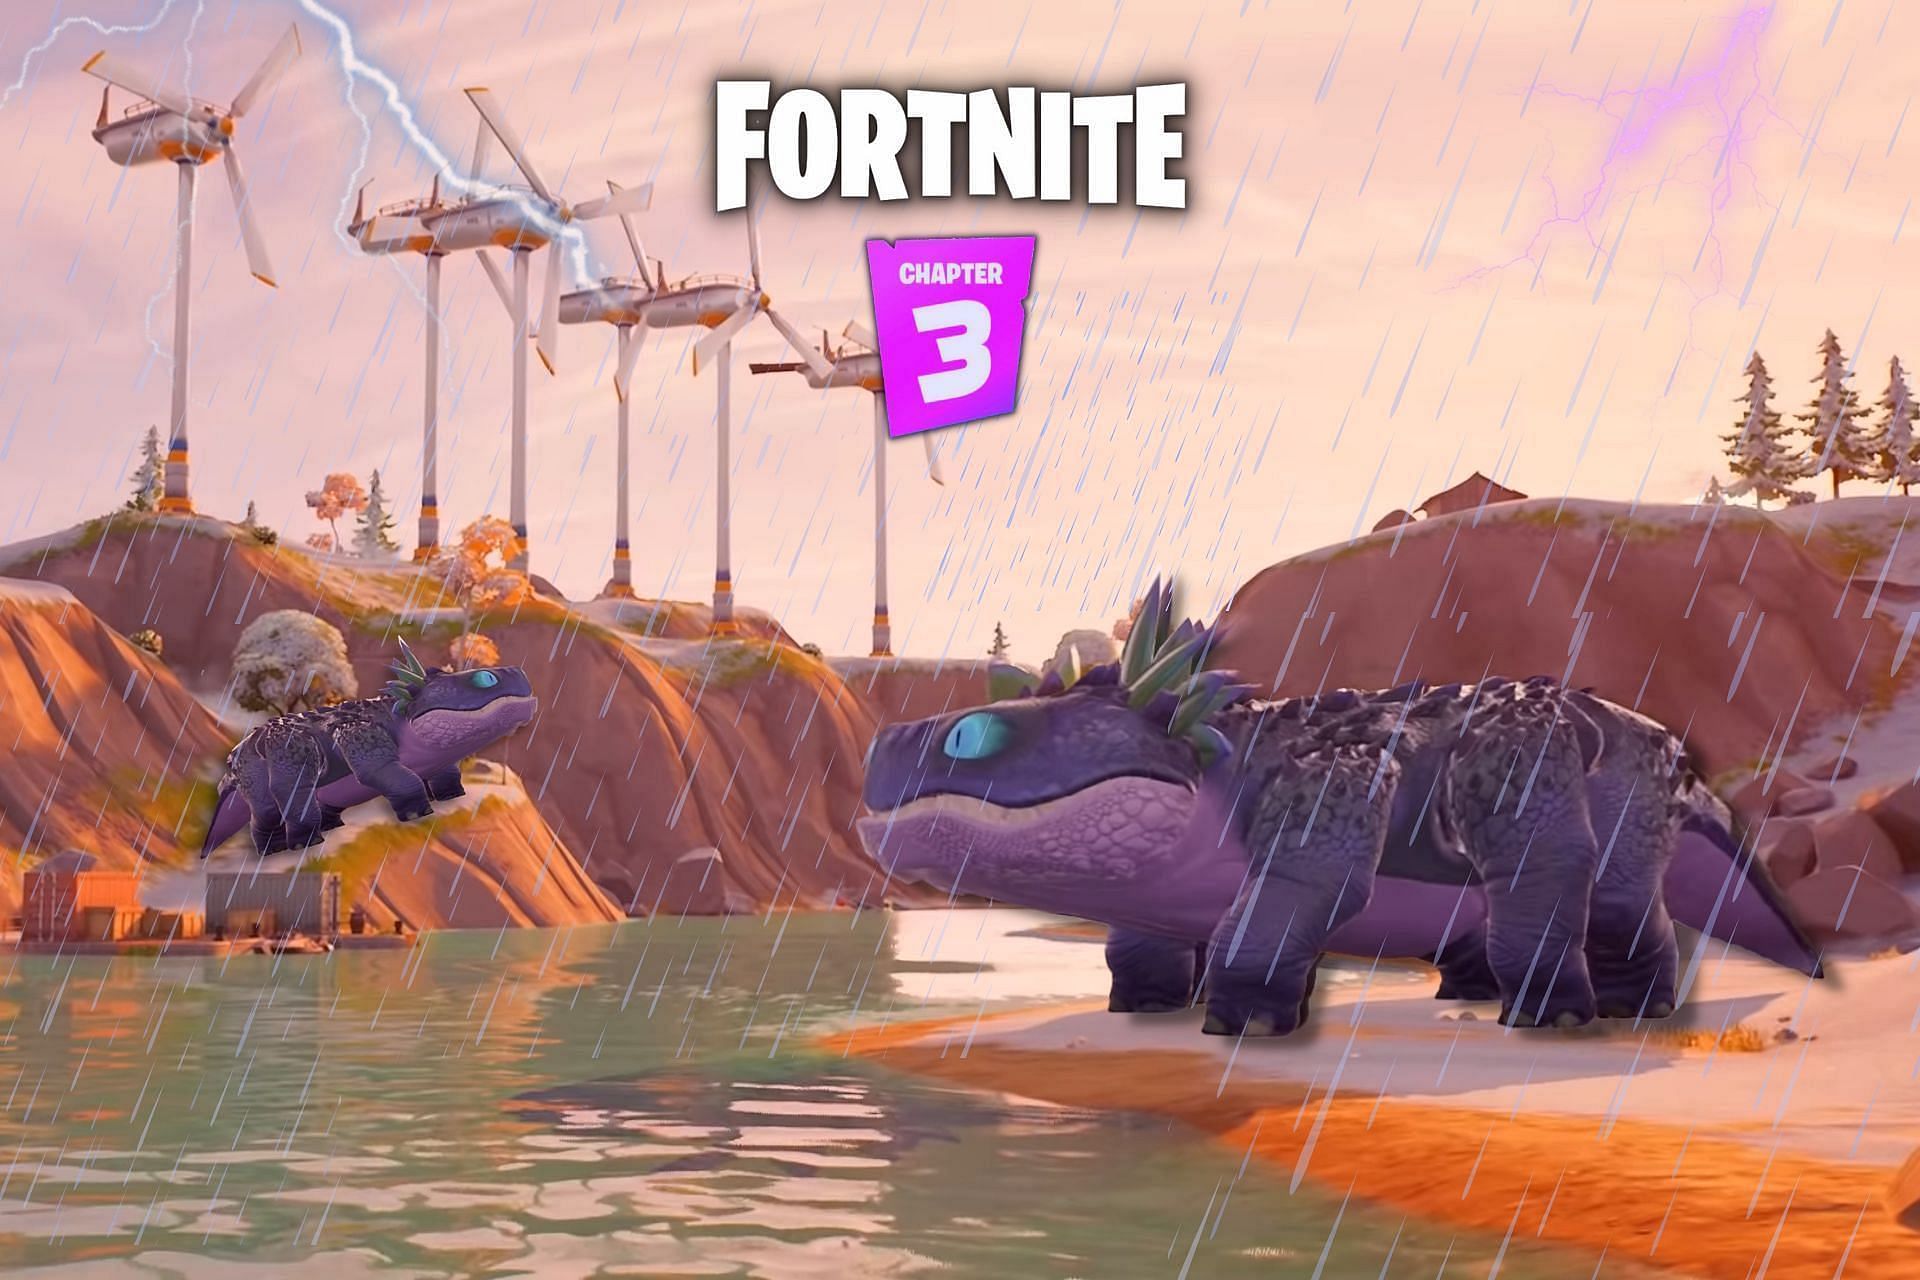 Dinosaurs hidden under the snow will come to life as Fortnite&#039;s Chapter 3 progresses (Image via sportskeeda)